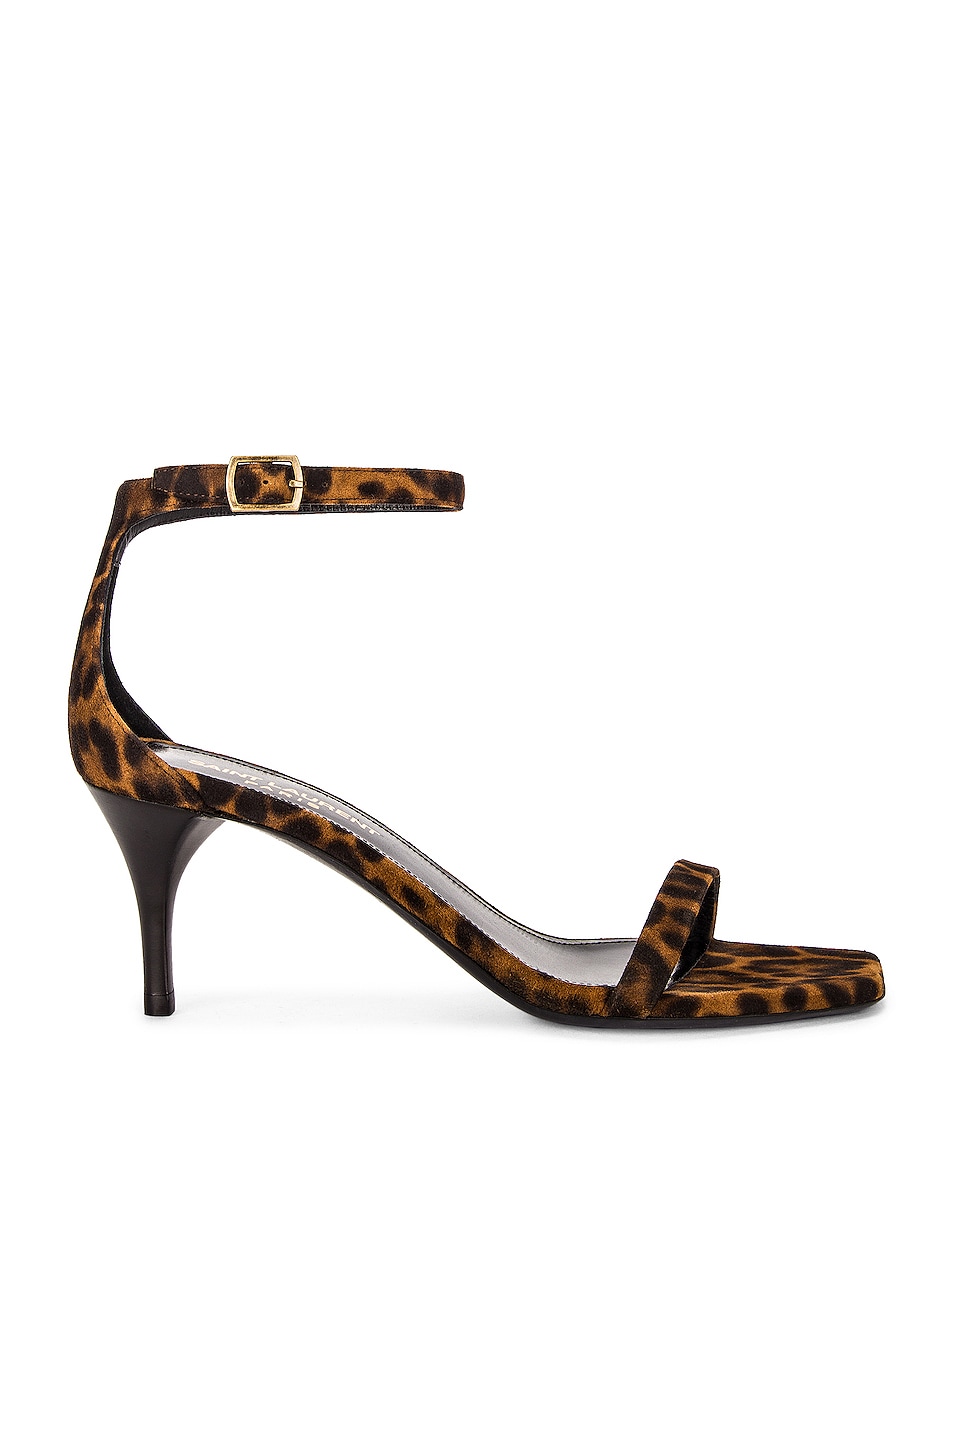 Image 1 of Saint Laurent Lexi Ankle Sandals in Manto Naturale Caffe